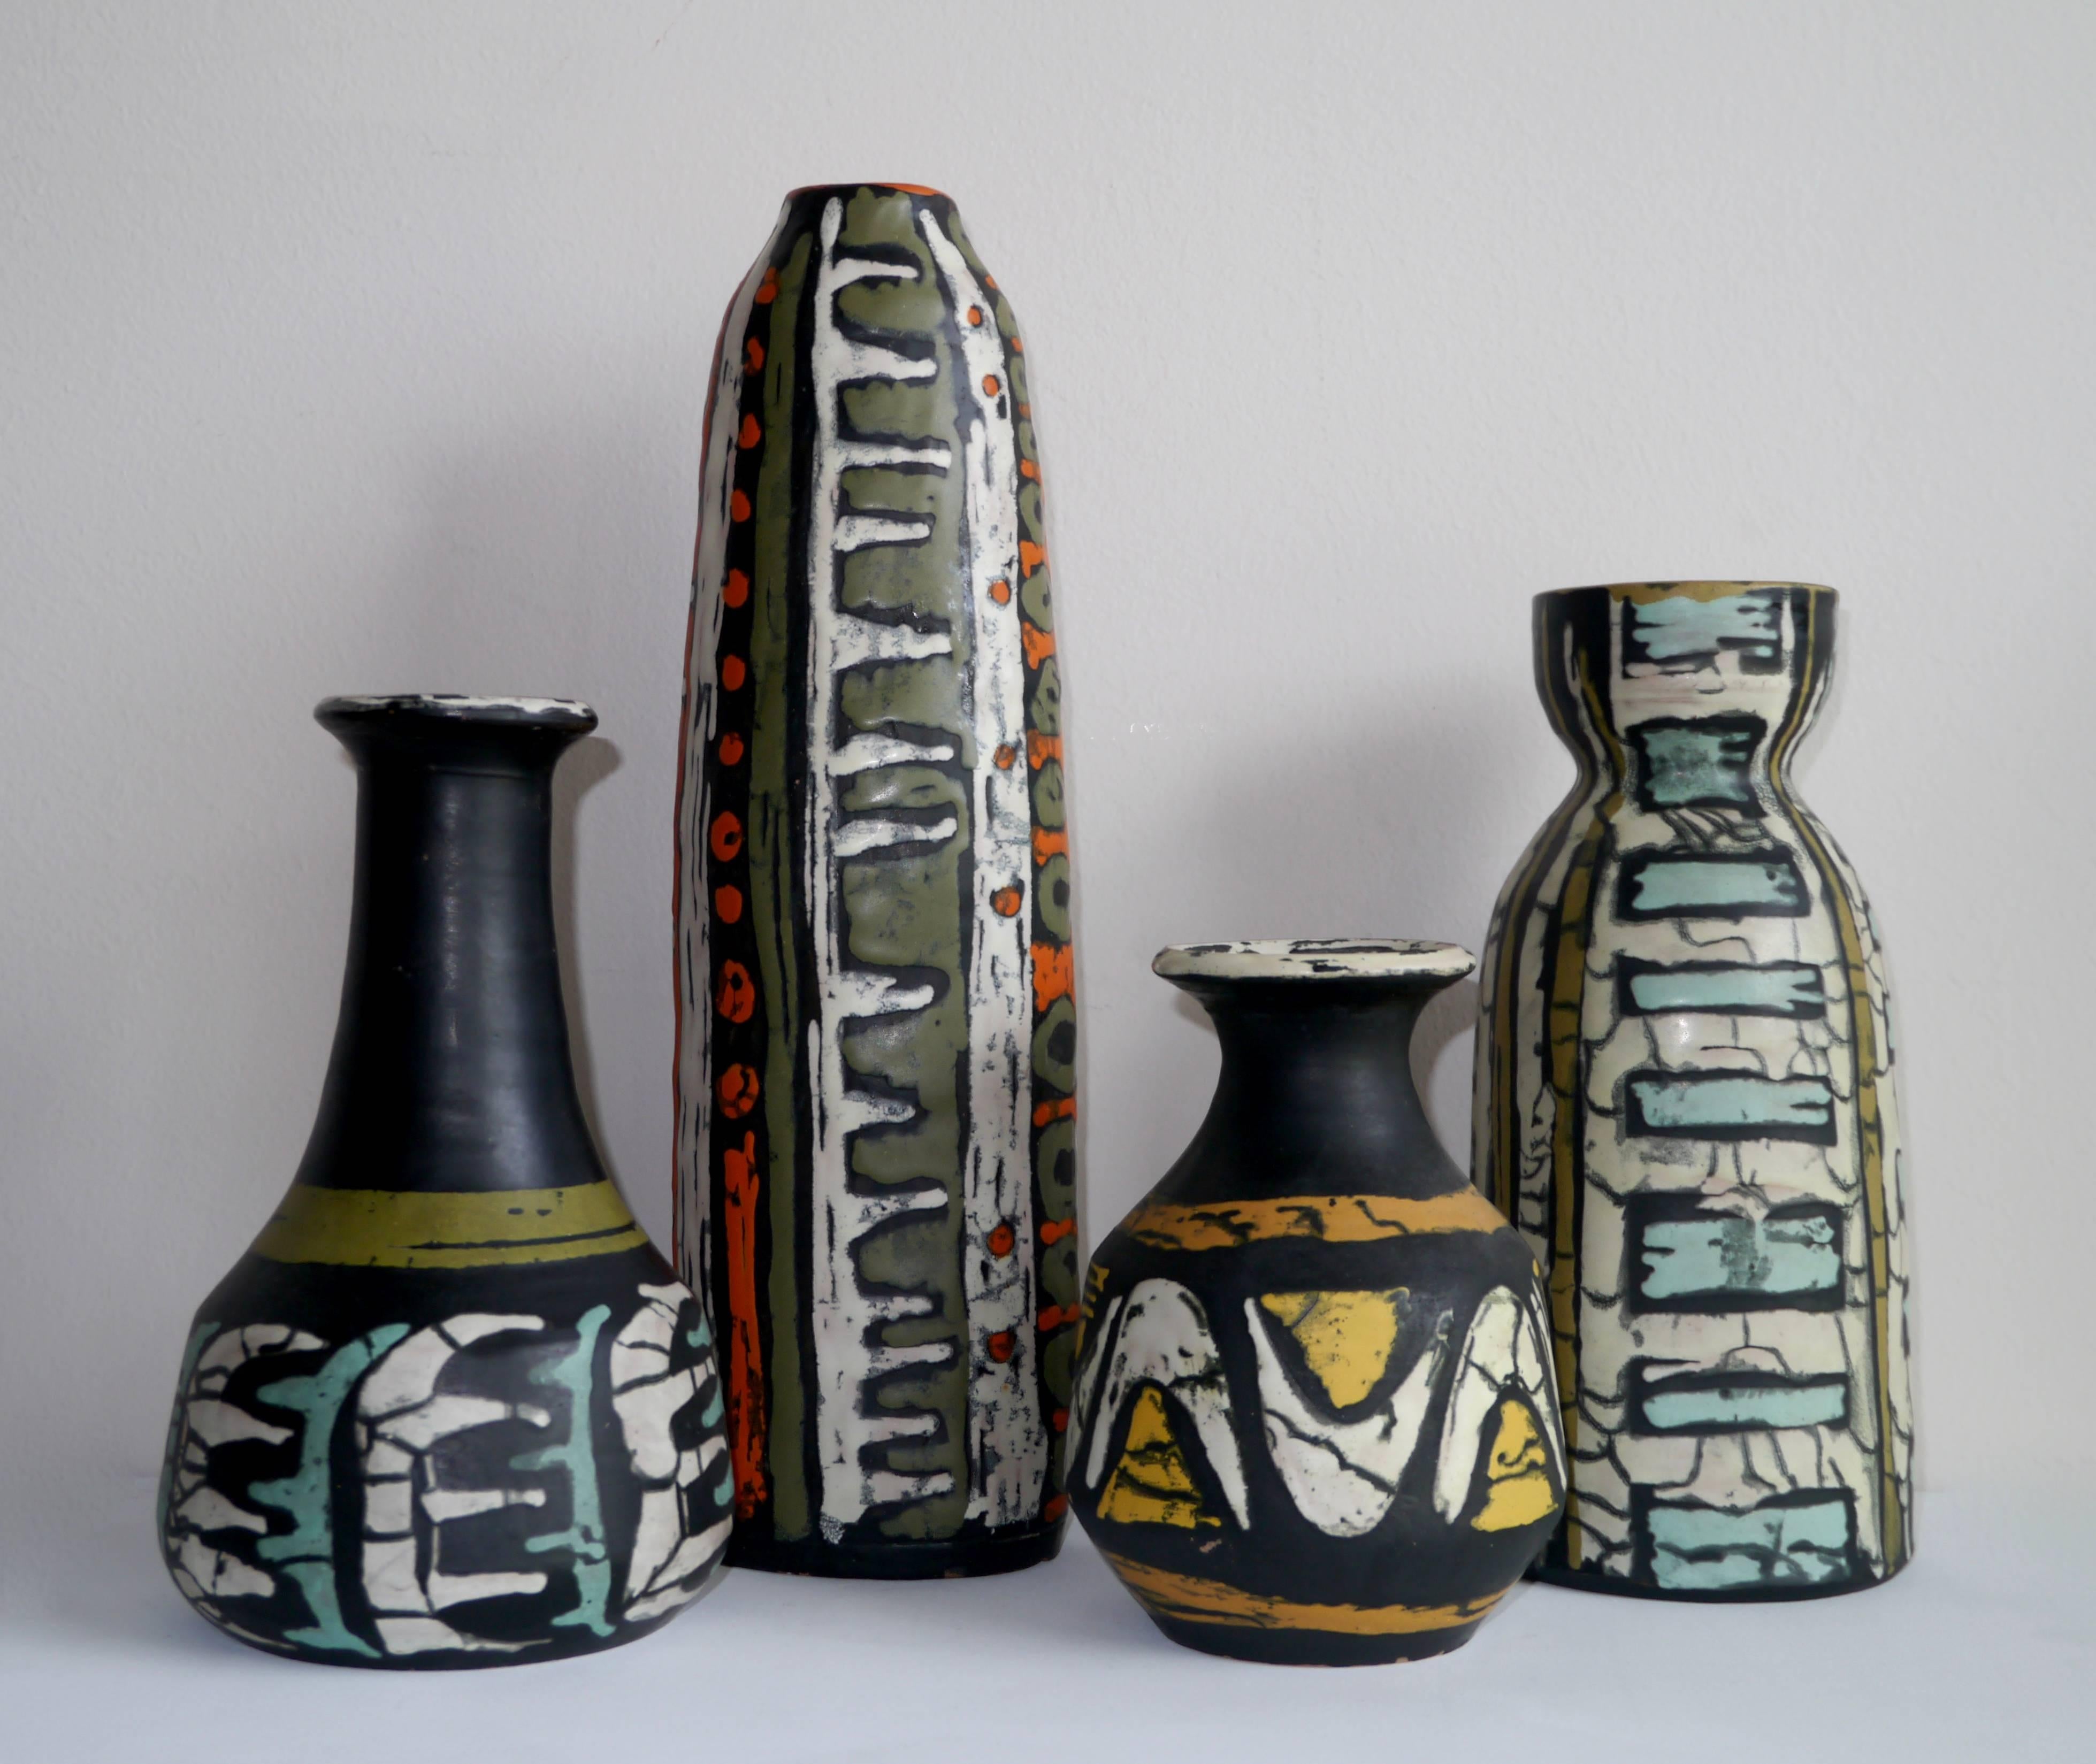 Livia Gorka - Grouping of 4 Vases - Hungary, c. 1950 In Excellent Condition For Sale In Saint Ouen, FR